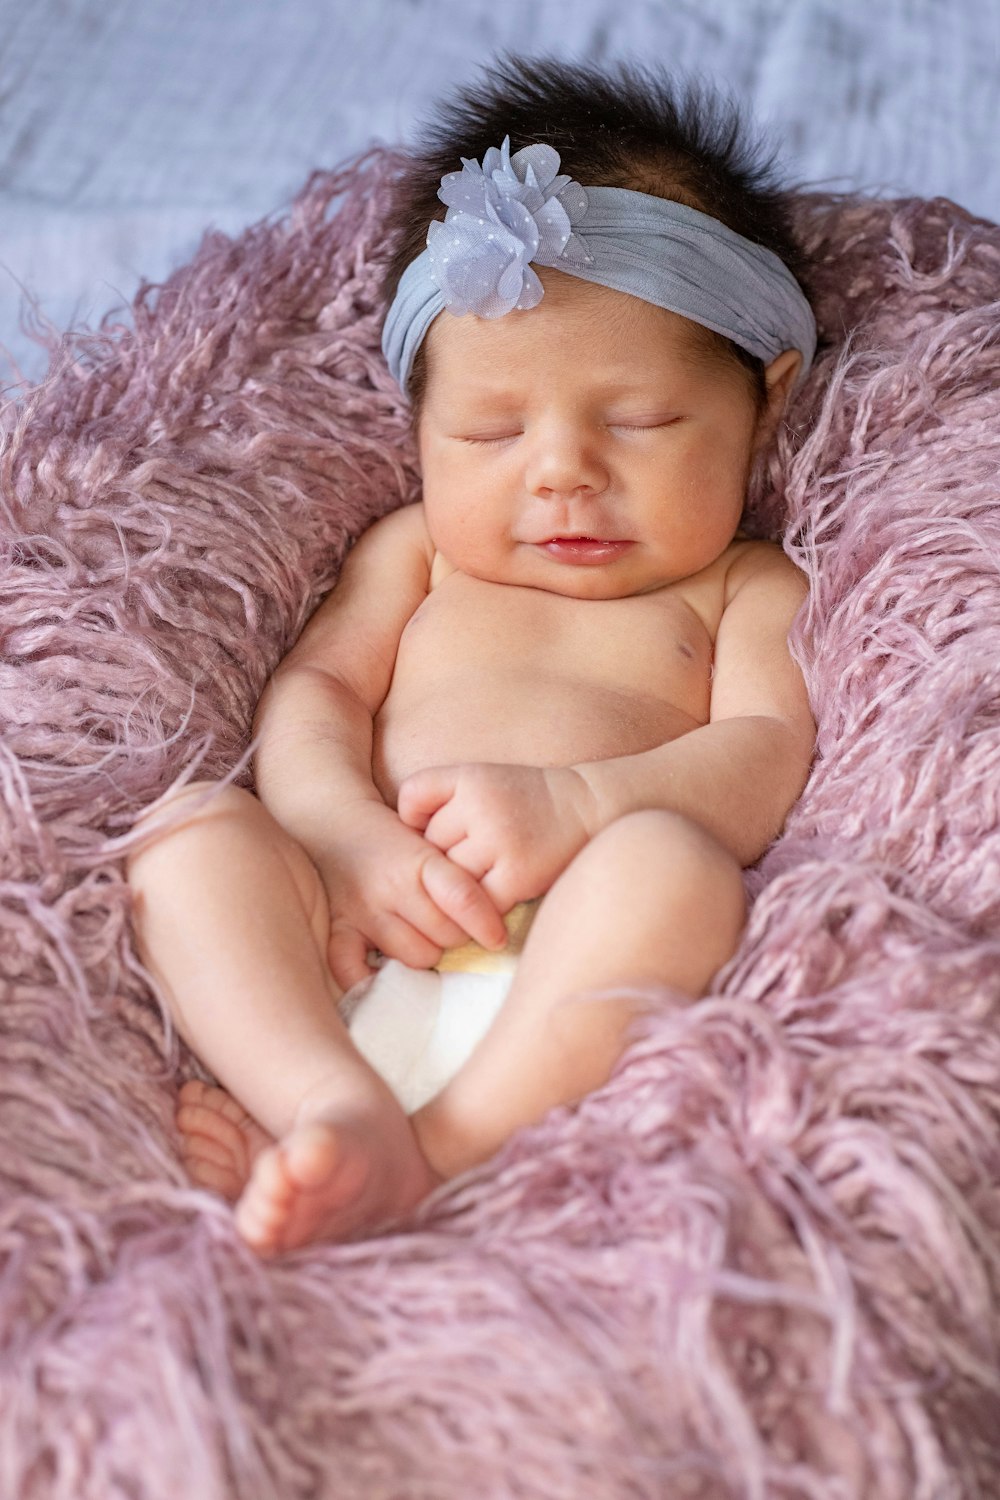 500+ Newborn Pictures [HD] | Download Free Images on Unsplash